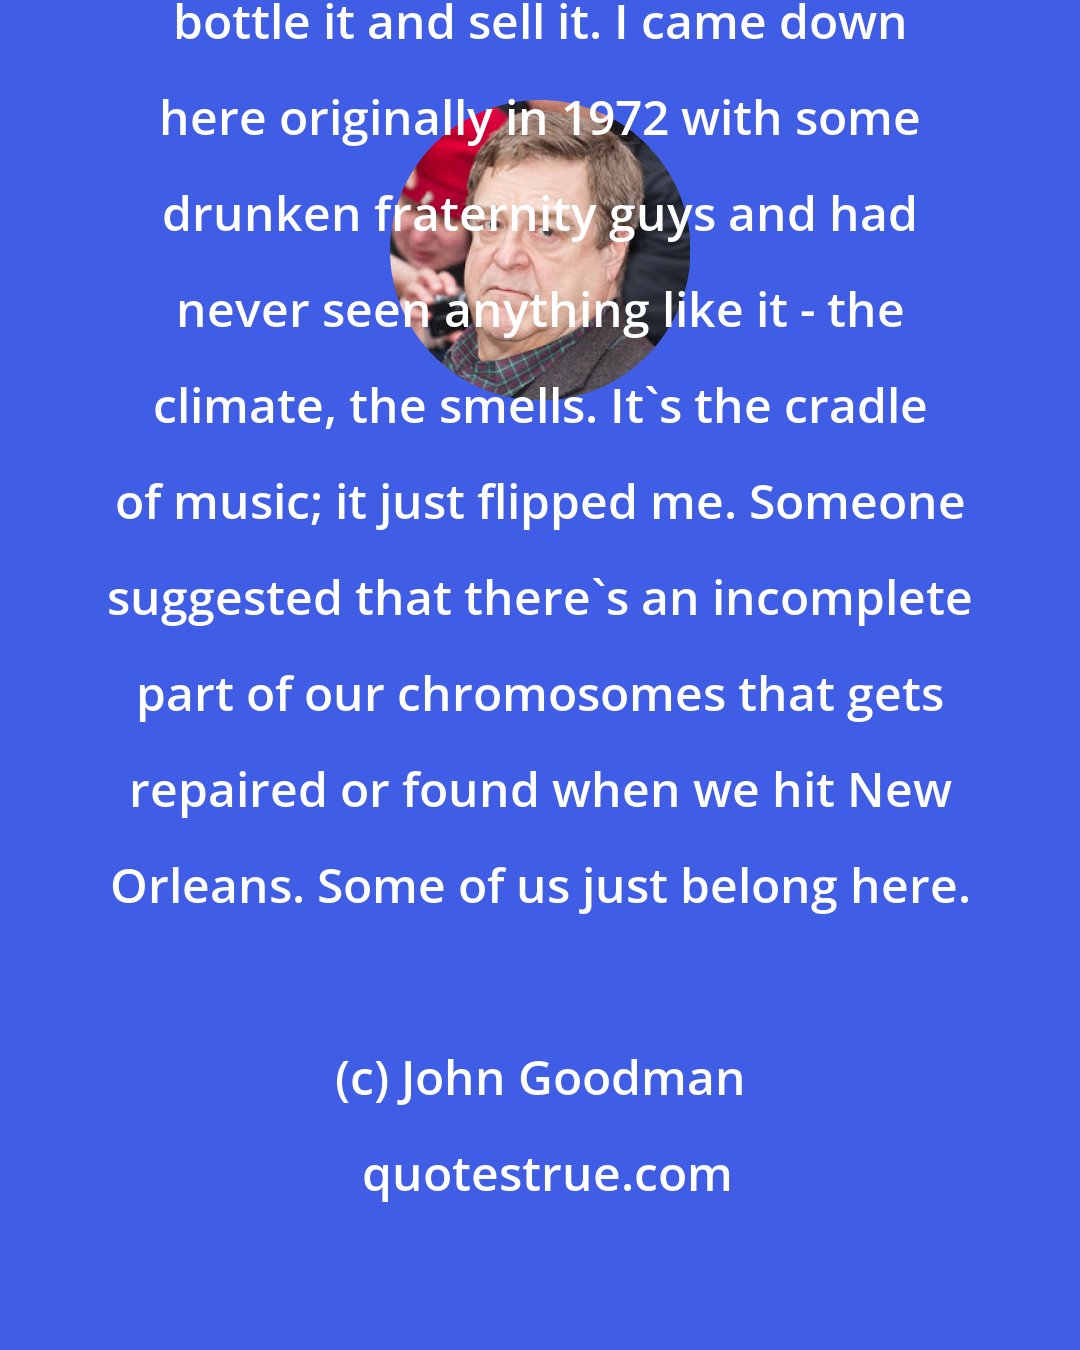 John Goodman: If I could put my finger on it, I'd bottle it and sell it. I came down here originally in 1972 with some drunken fraternity guys and had never seen anything like it - the climate, the smells. It's the cradle of music; it just flipped me. Someone suggested that there's an incomplete part of our chromosomes that gets repaired or found when we hit New Orleans. Some of us just belong here.